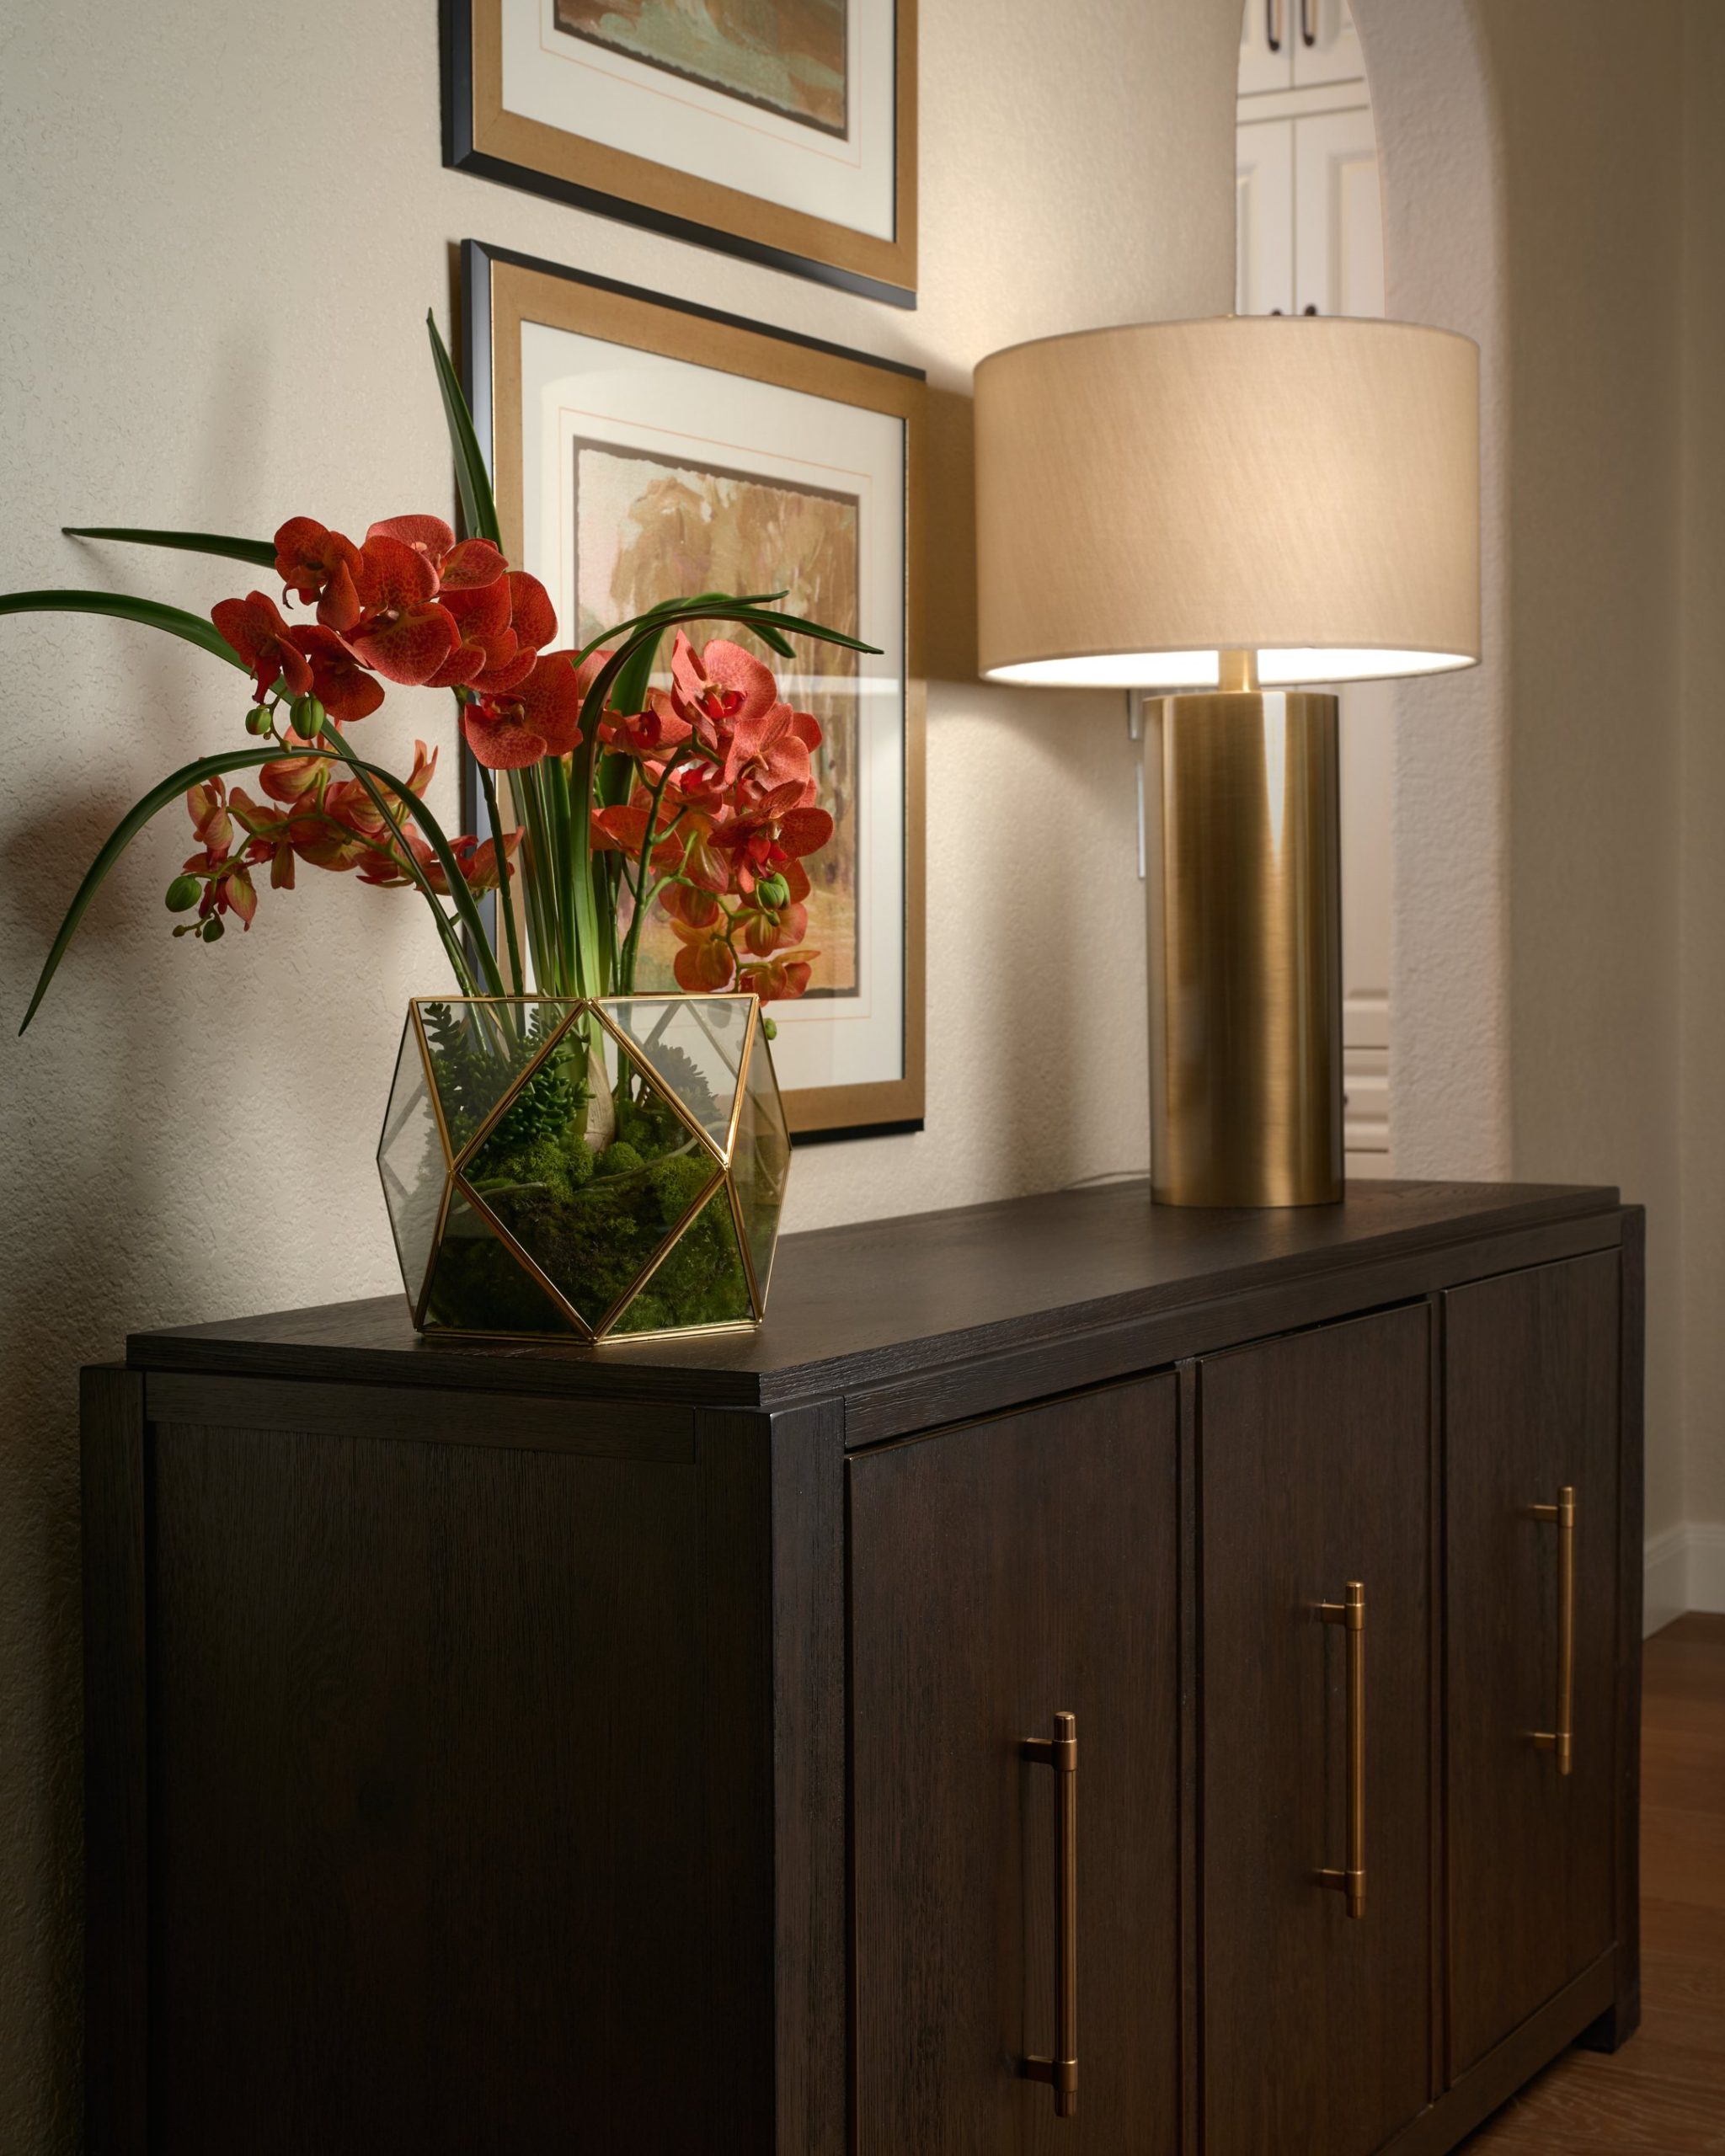 Hallway cabinet flowers and lamp image for Reviews Page